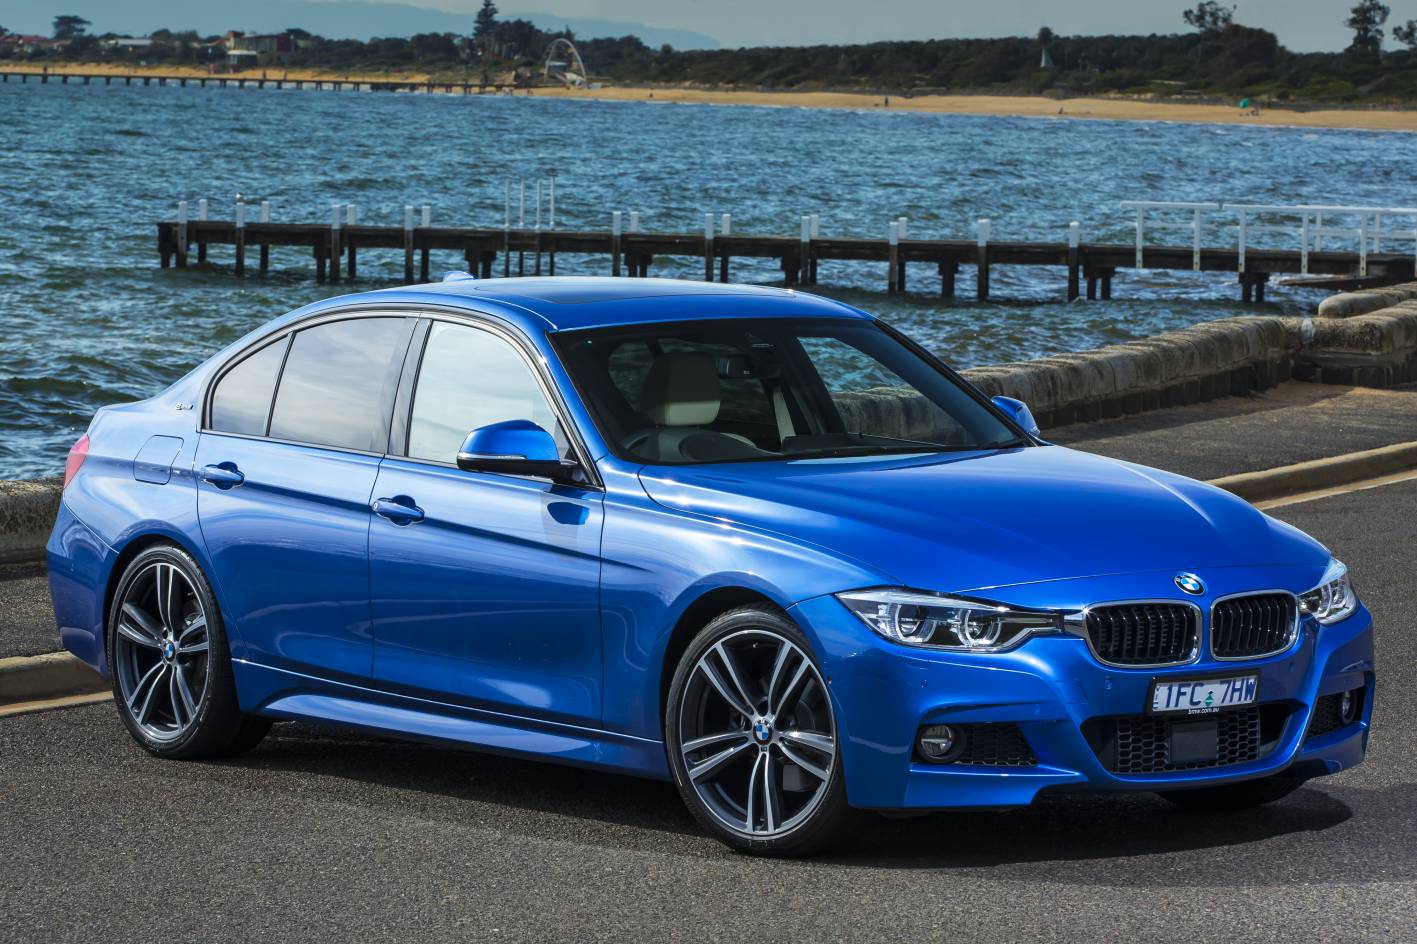 BMW 330e plug-in hybrid joins 3 Series range from $71,900 - ForceGT.com